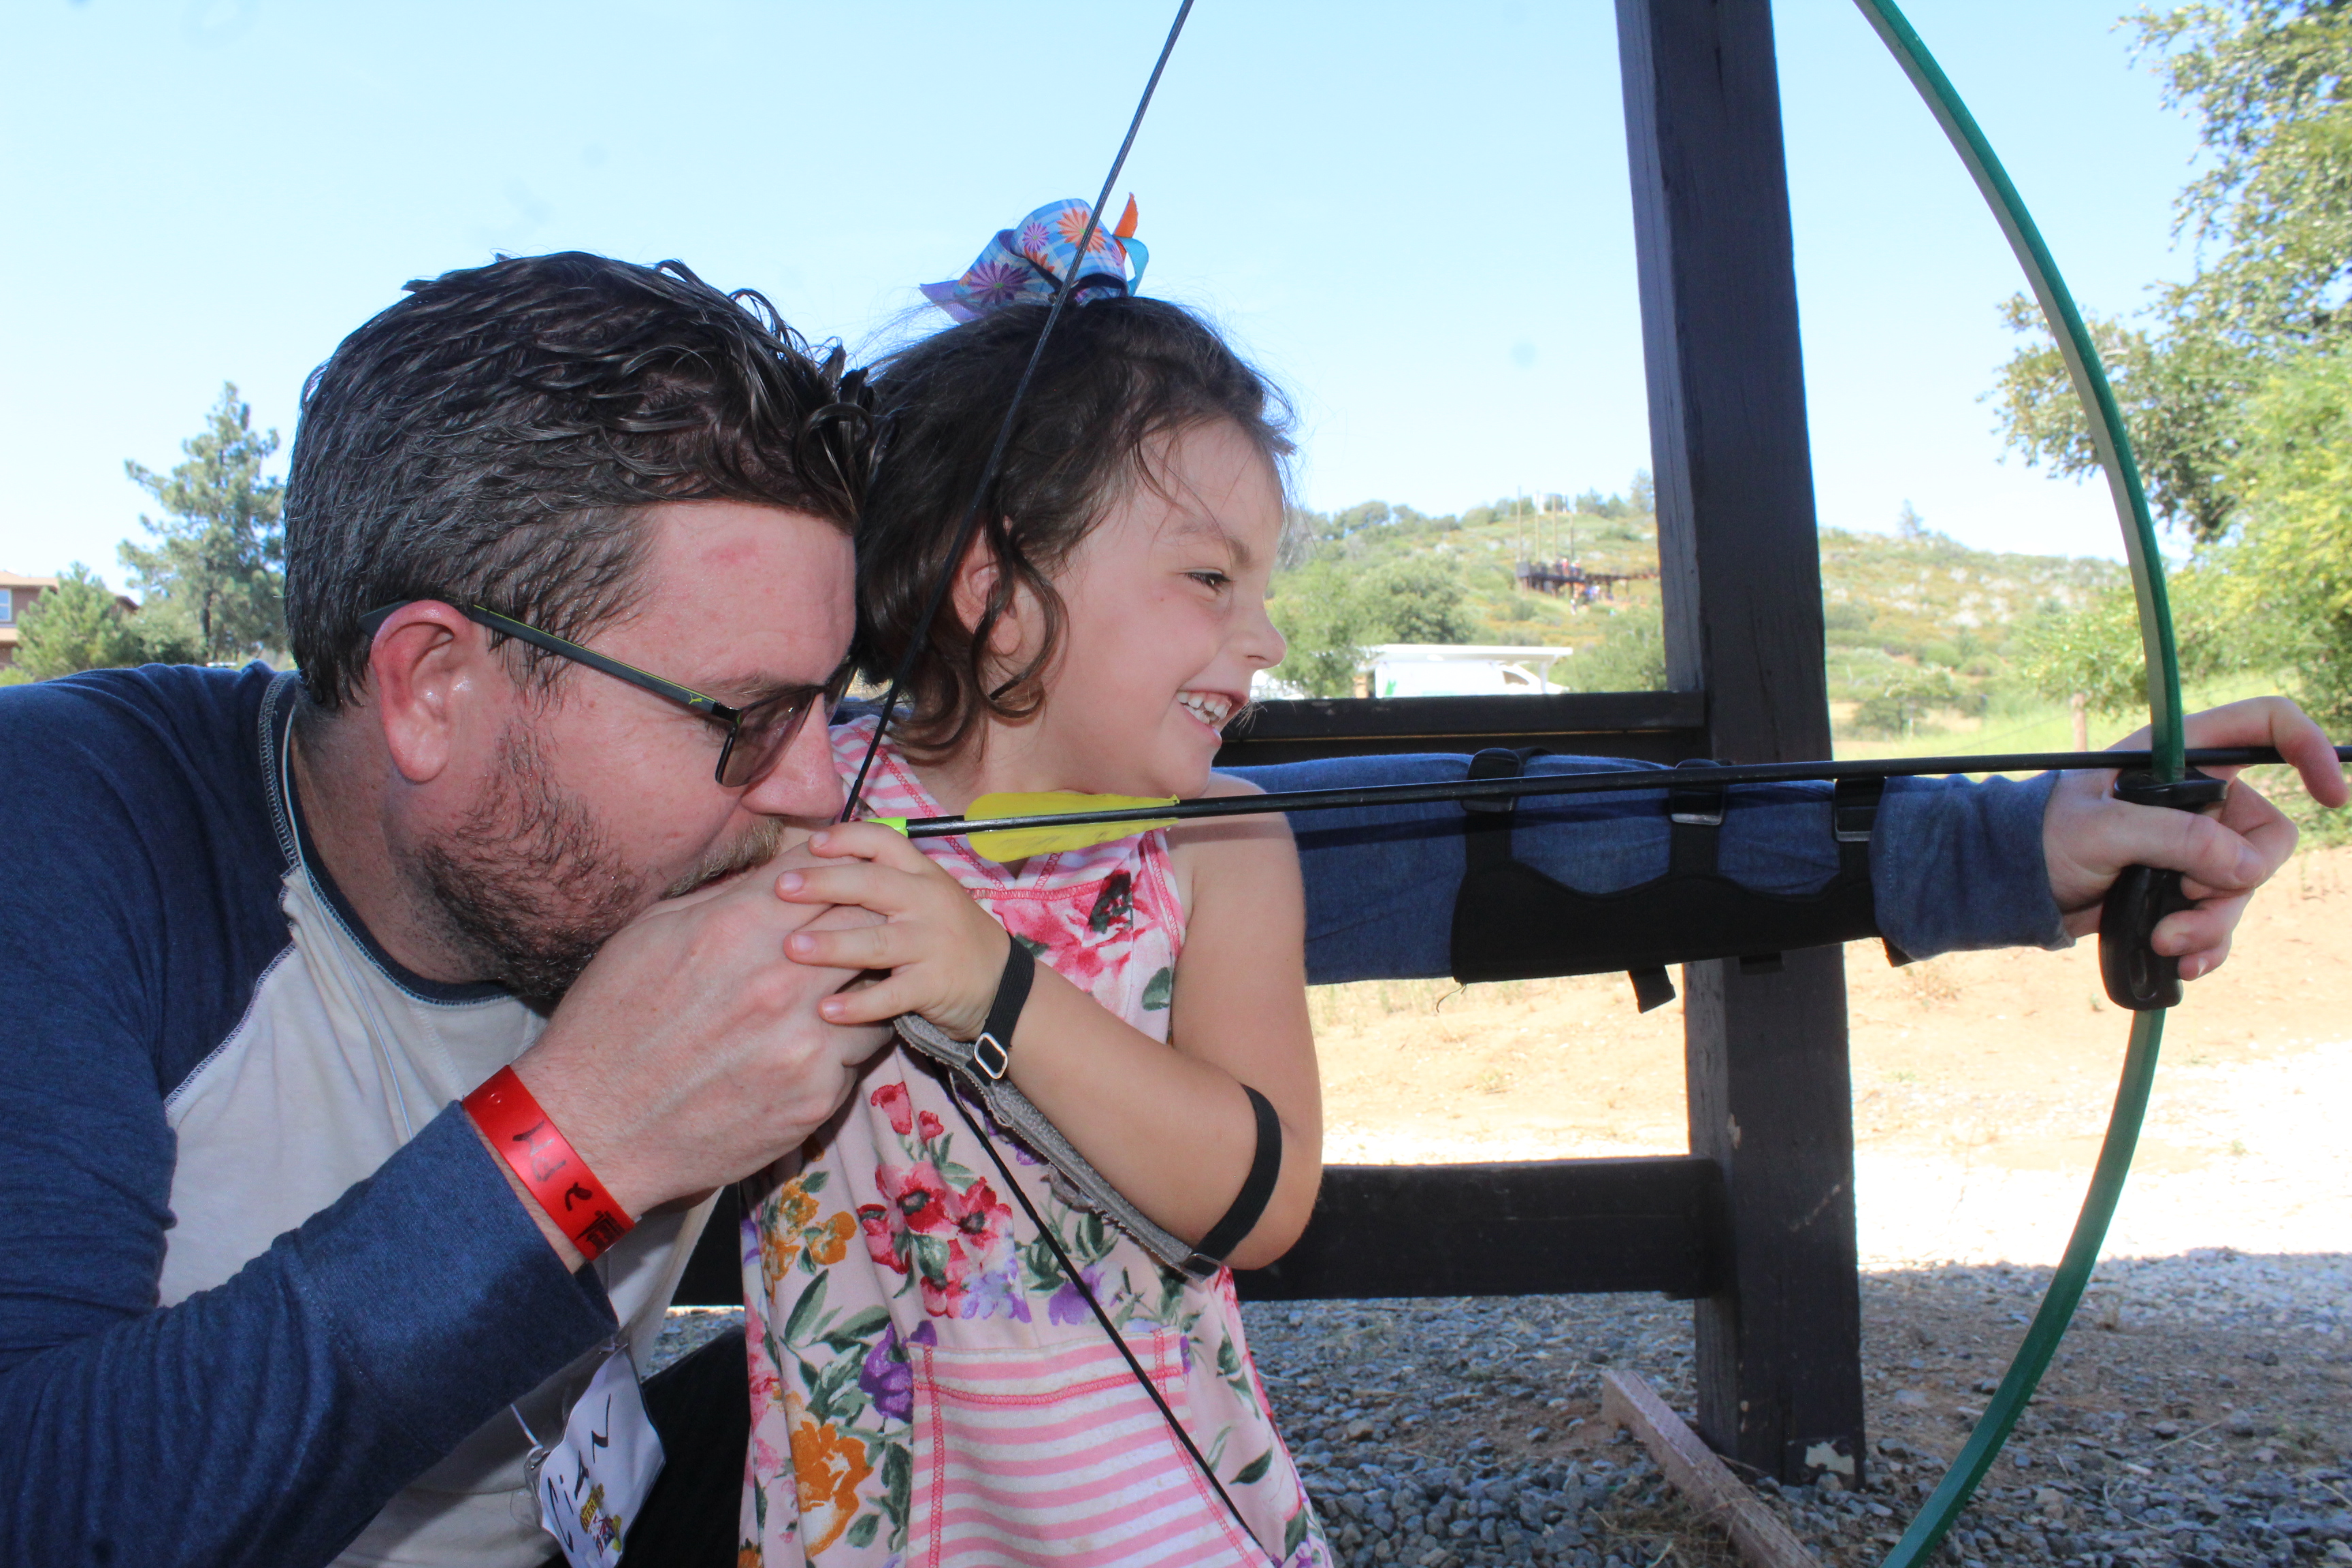 Dad helping girl aim bow and arrow during archery